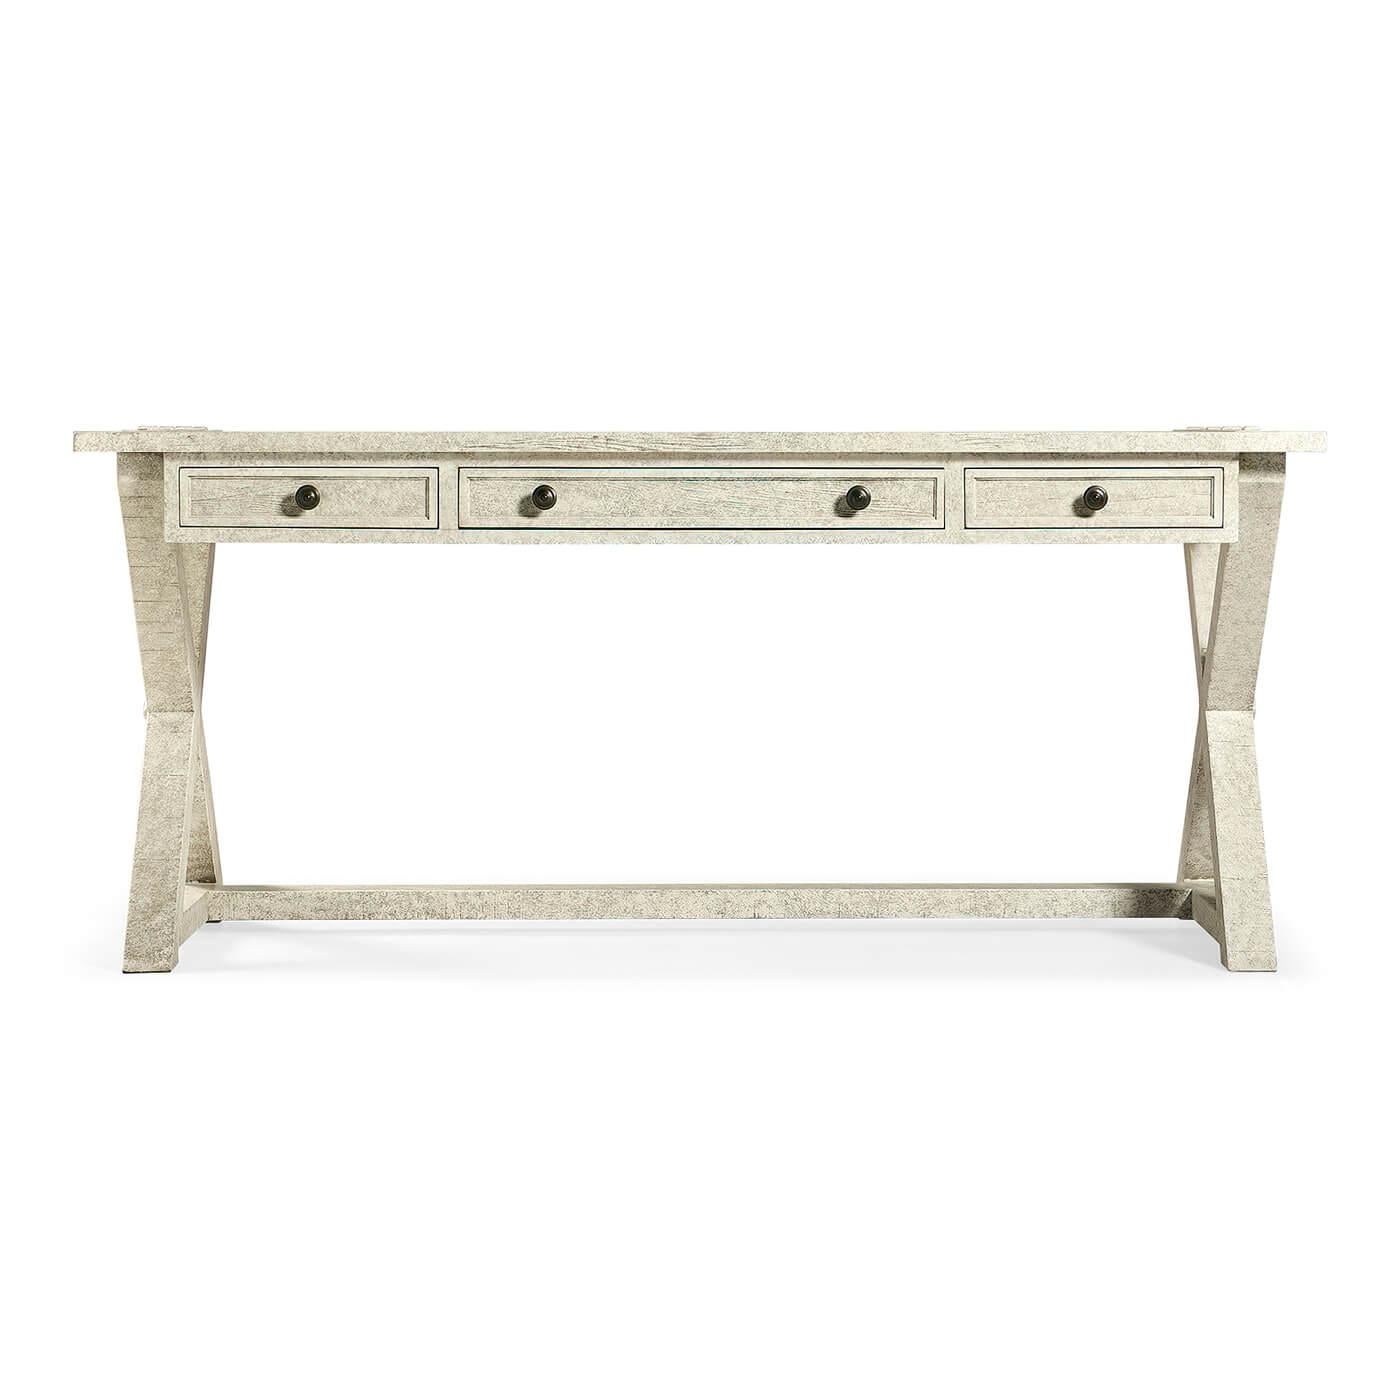 A rustic country-style solid whitewash rectangular desk with a rustic finish revealing exposed saw marks. Three small oak-lined drawers to front with mortice and tenon joints to X-frame support and top surface.

Dimensions: 68